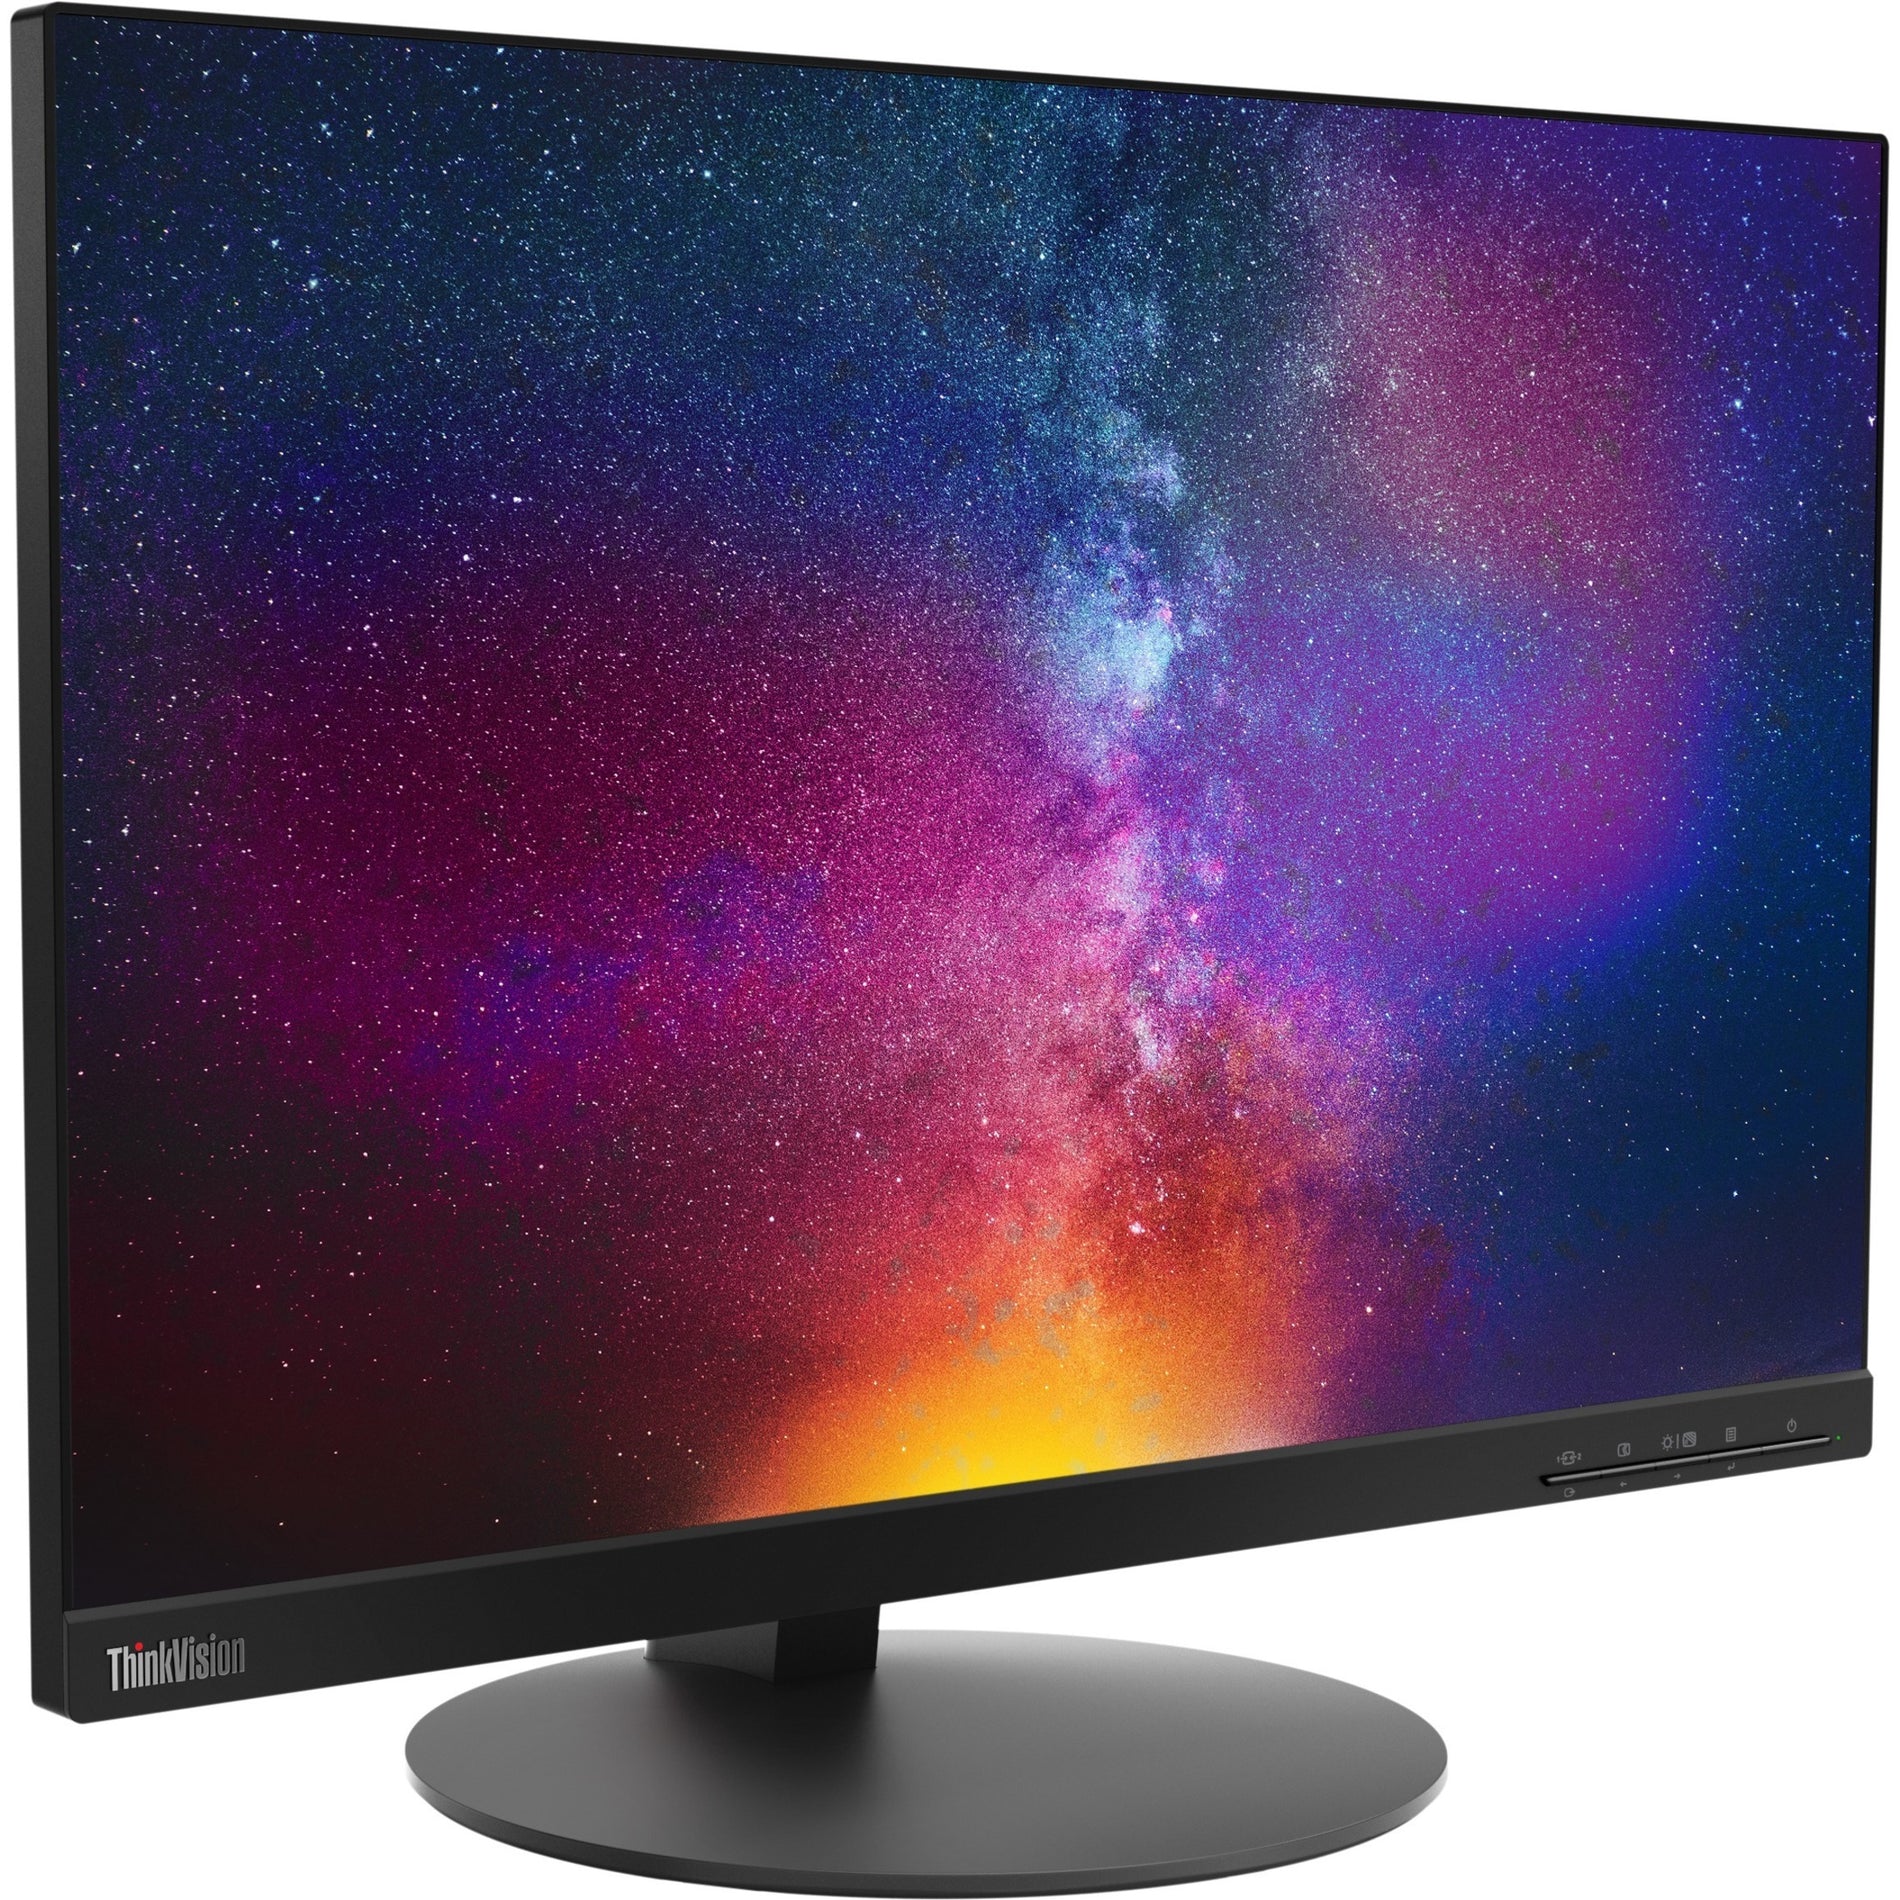 Lenovo ThinkVision T23d Widescreen LCD Monitor - 22.5" Display, 1920x1200 Resolution, HDMI, Black [Discontinued]